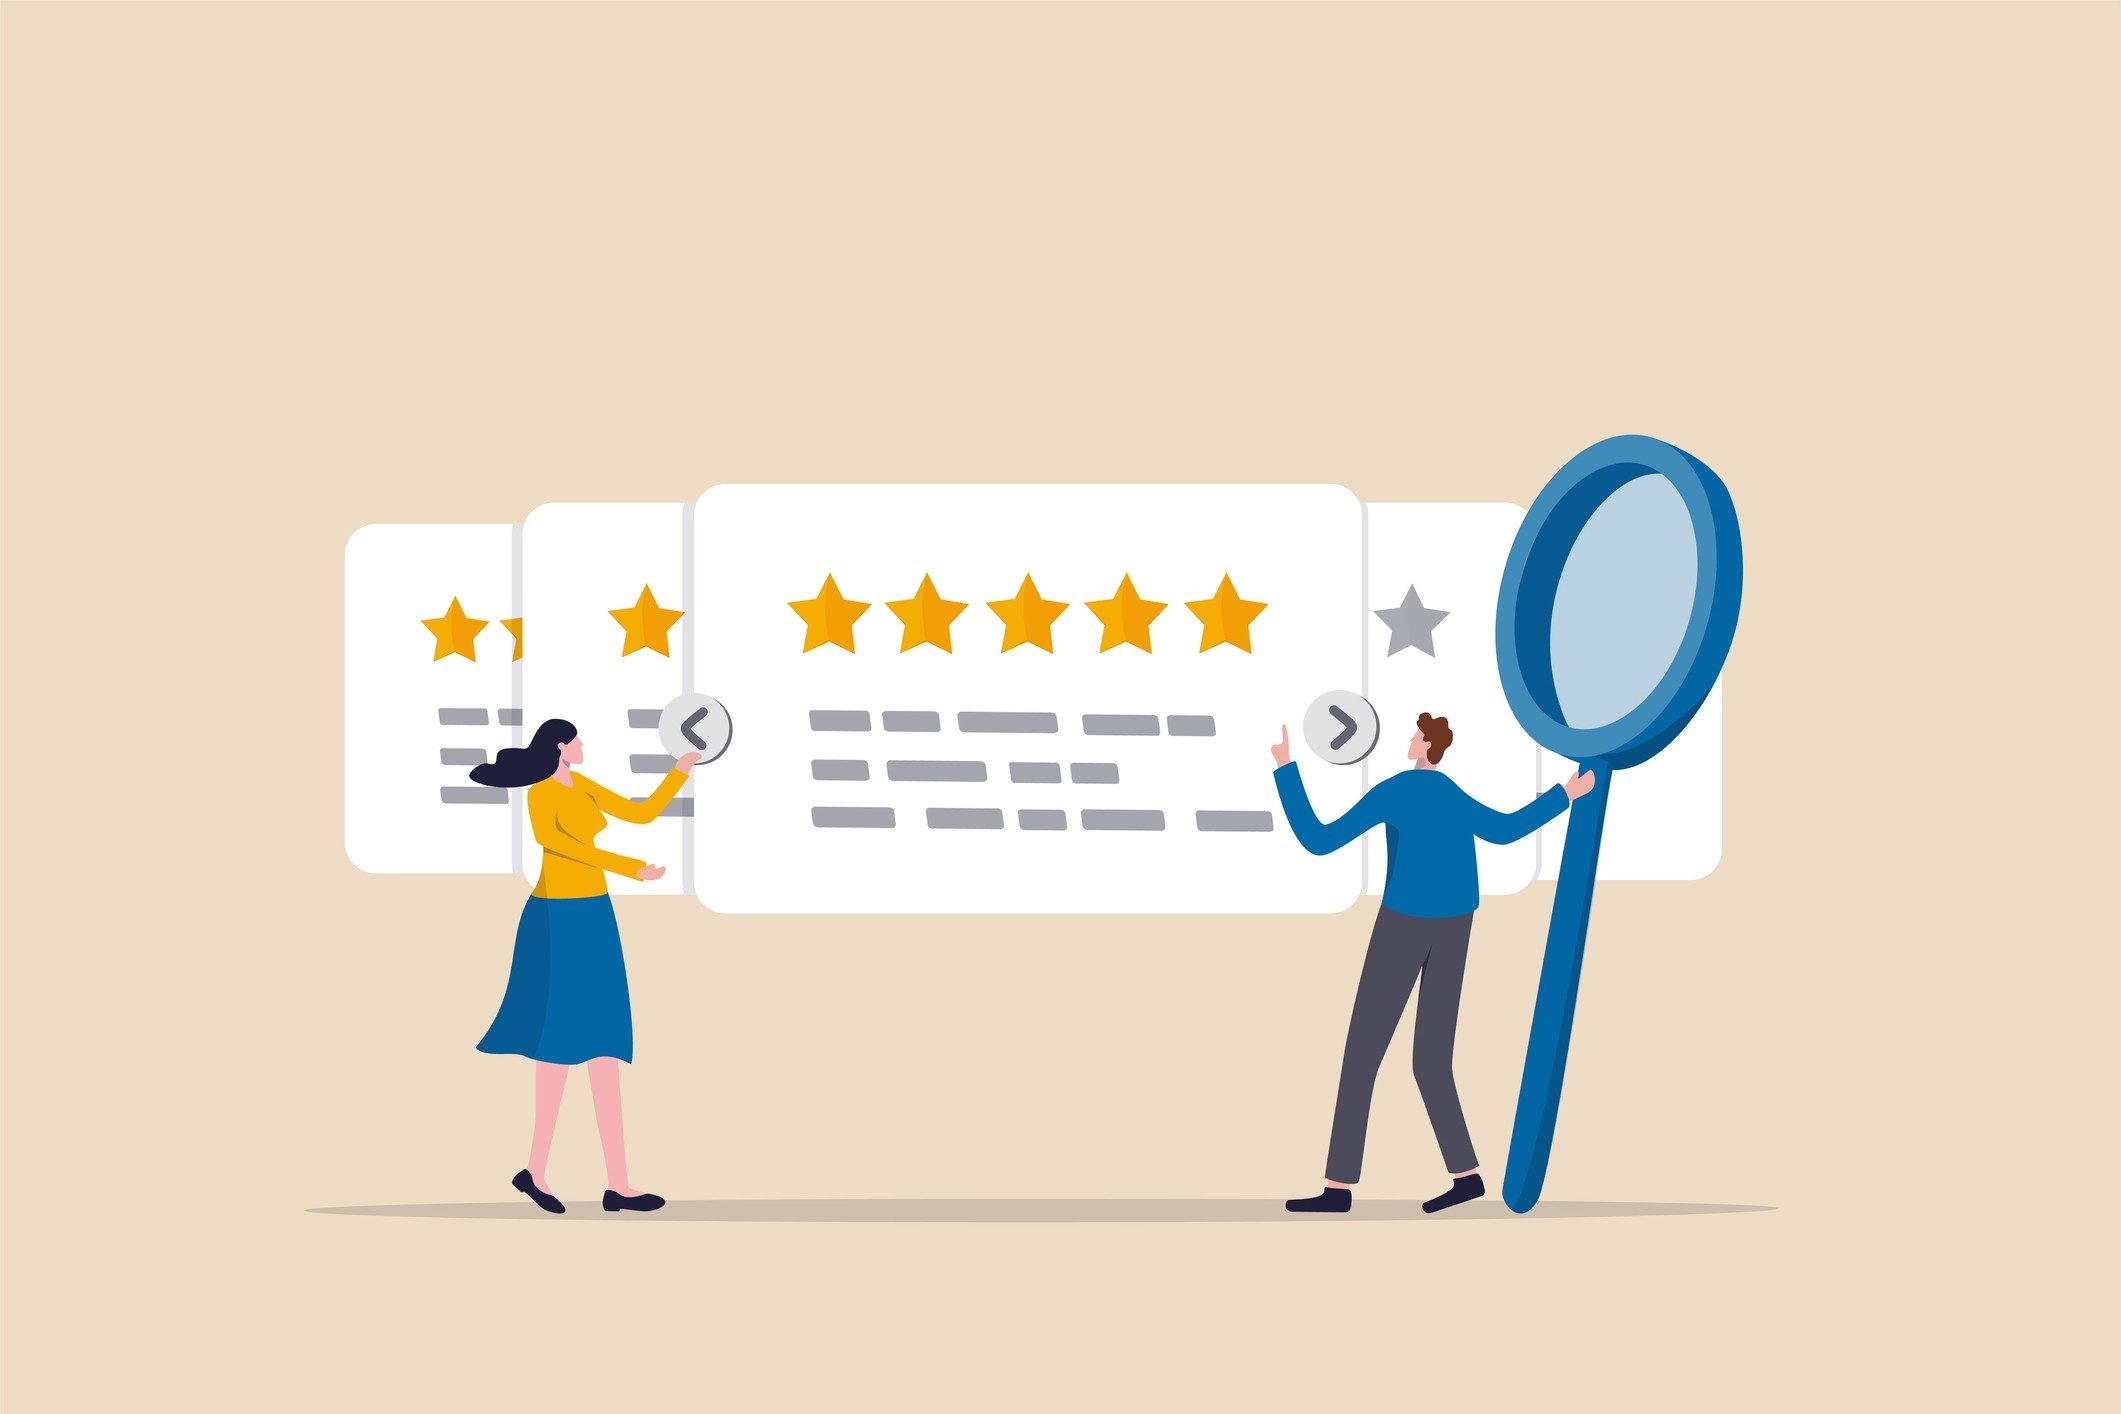 Reputation management team monitor online feedback rating to improve brand positive rank and gain customer trust concept, marketing team monitor and analyze stars rating to increase satisfaction.